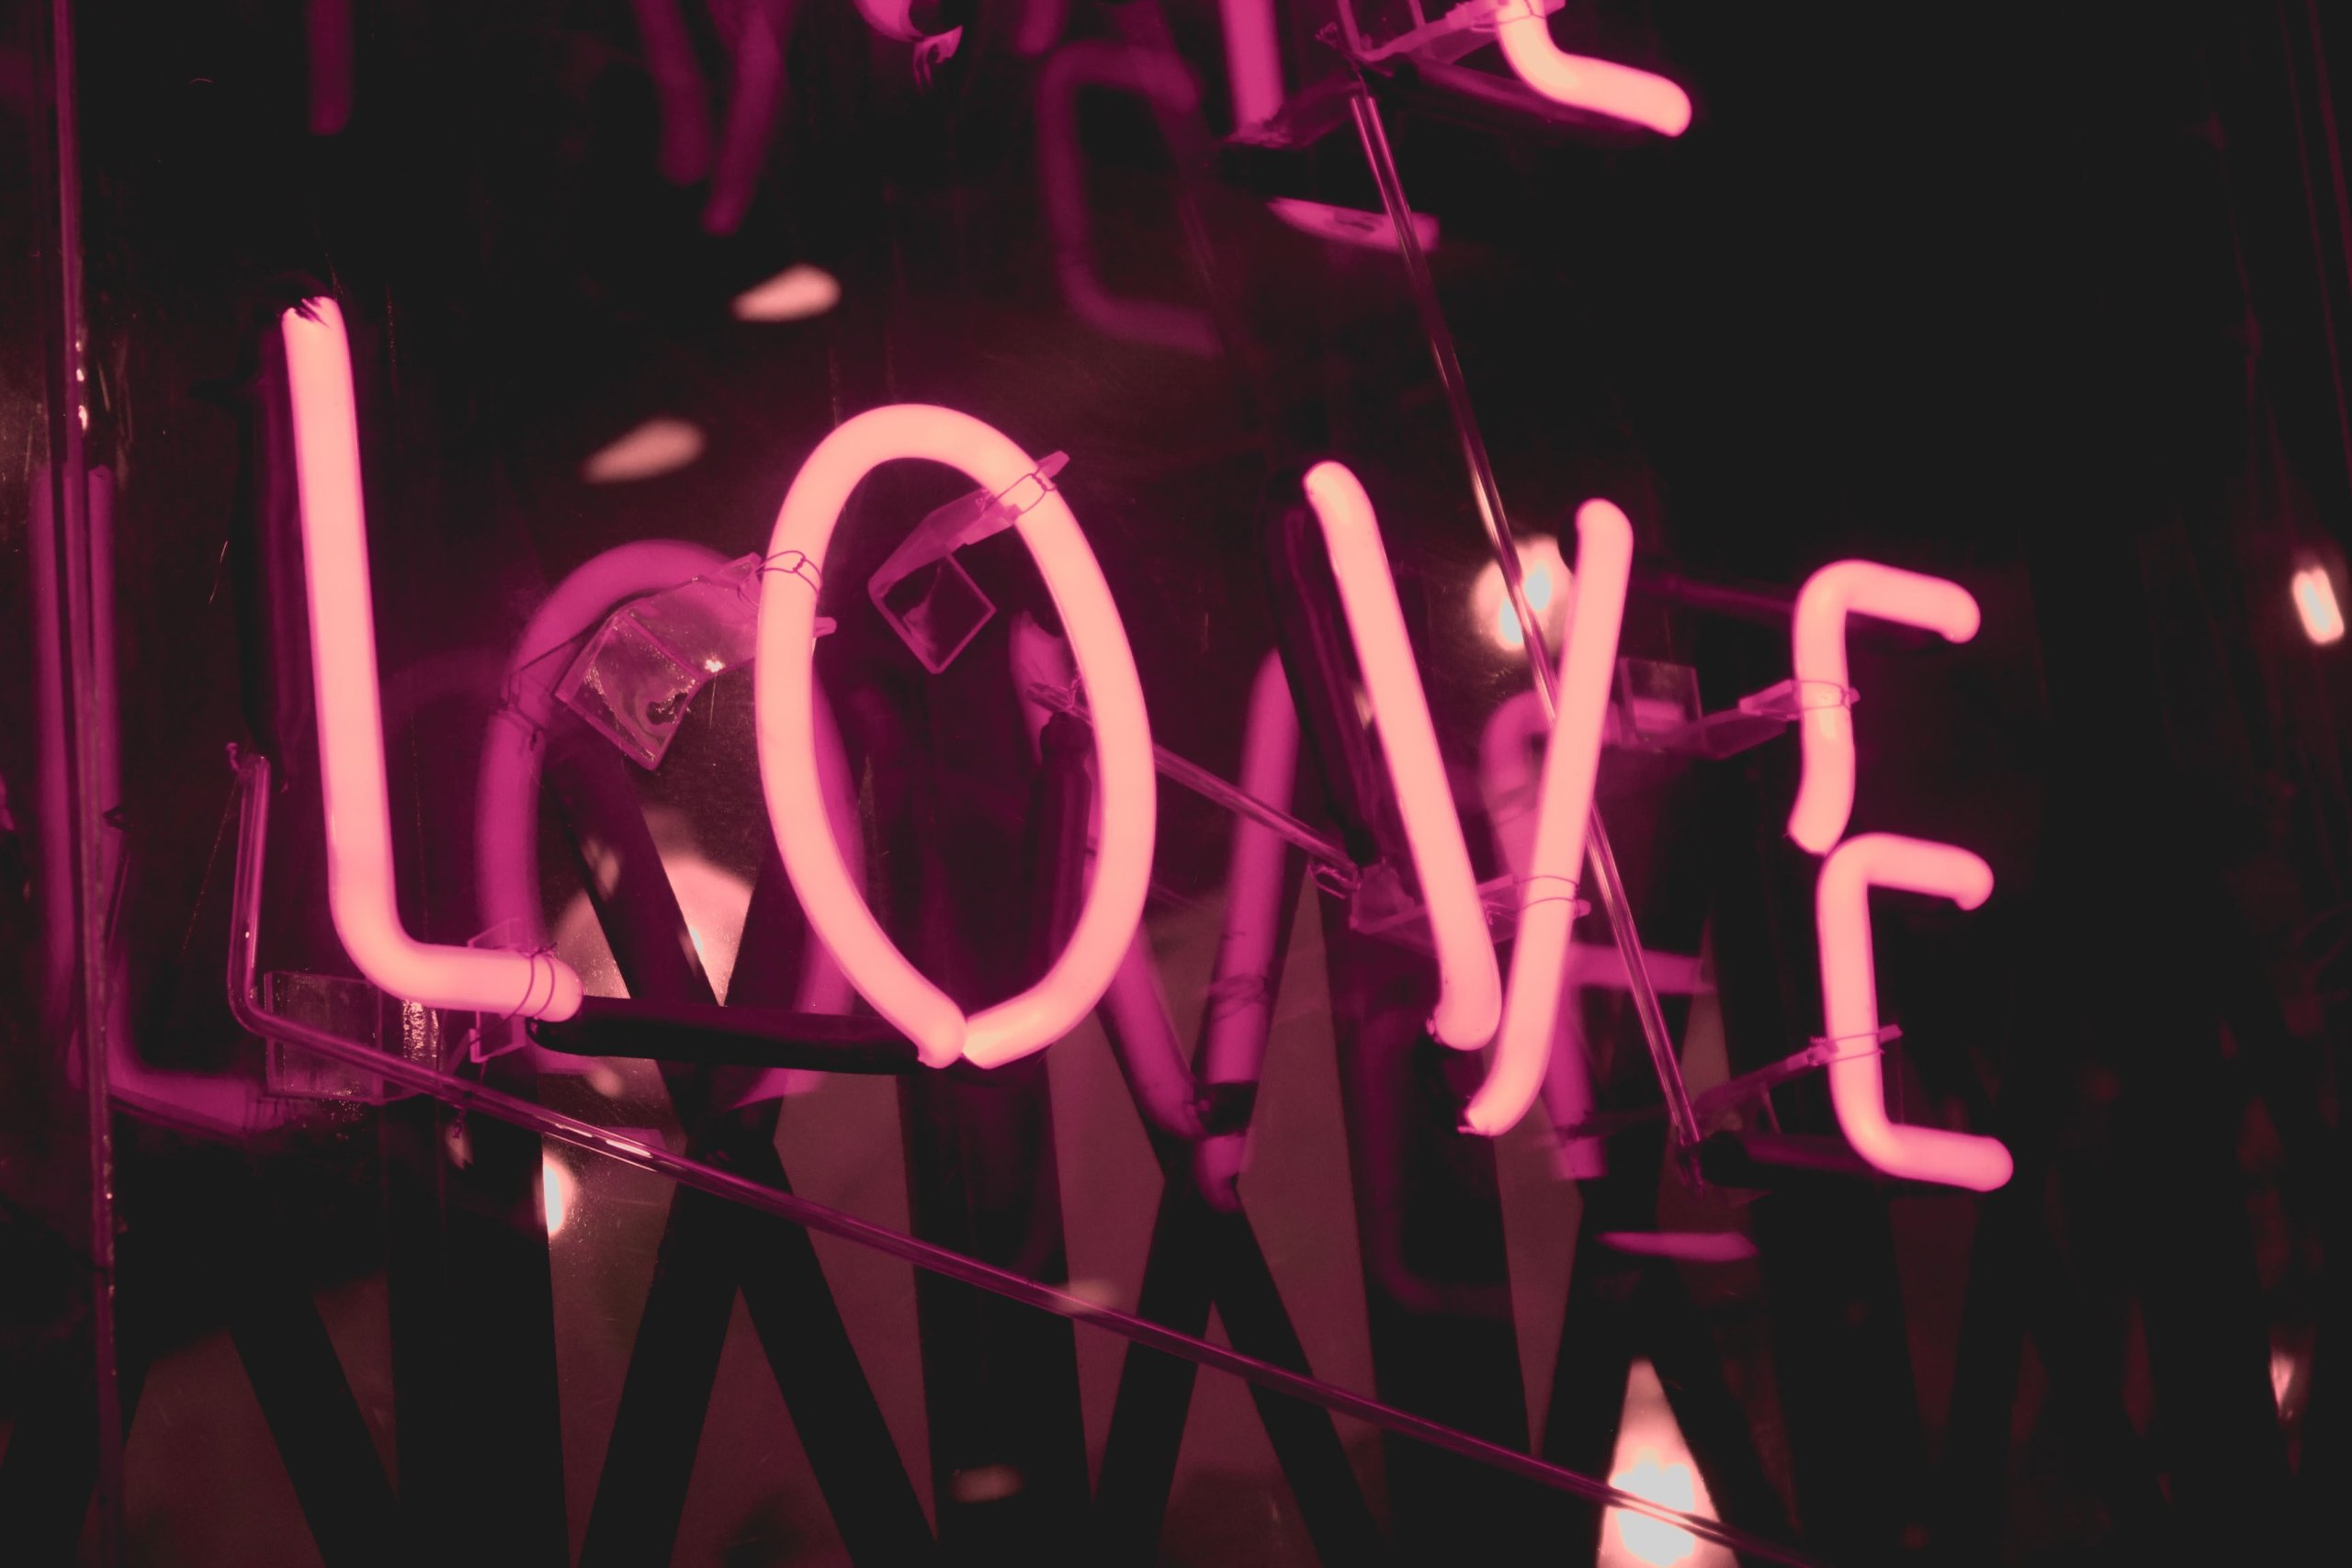 The word Love in neon letters